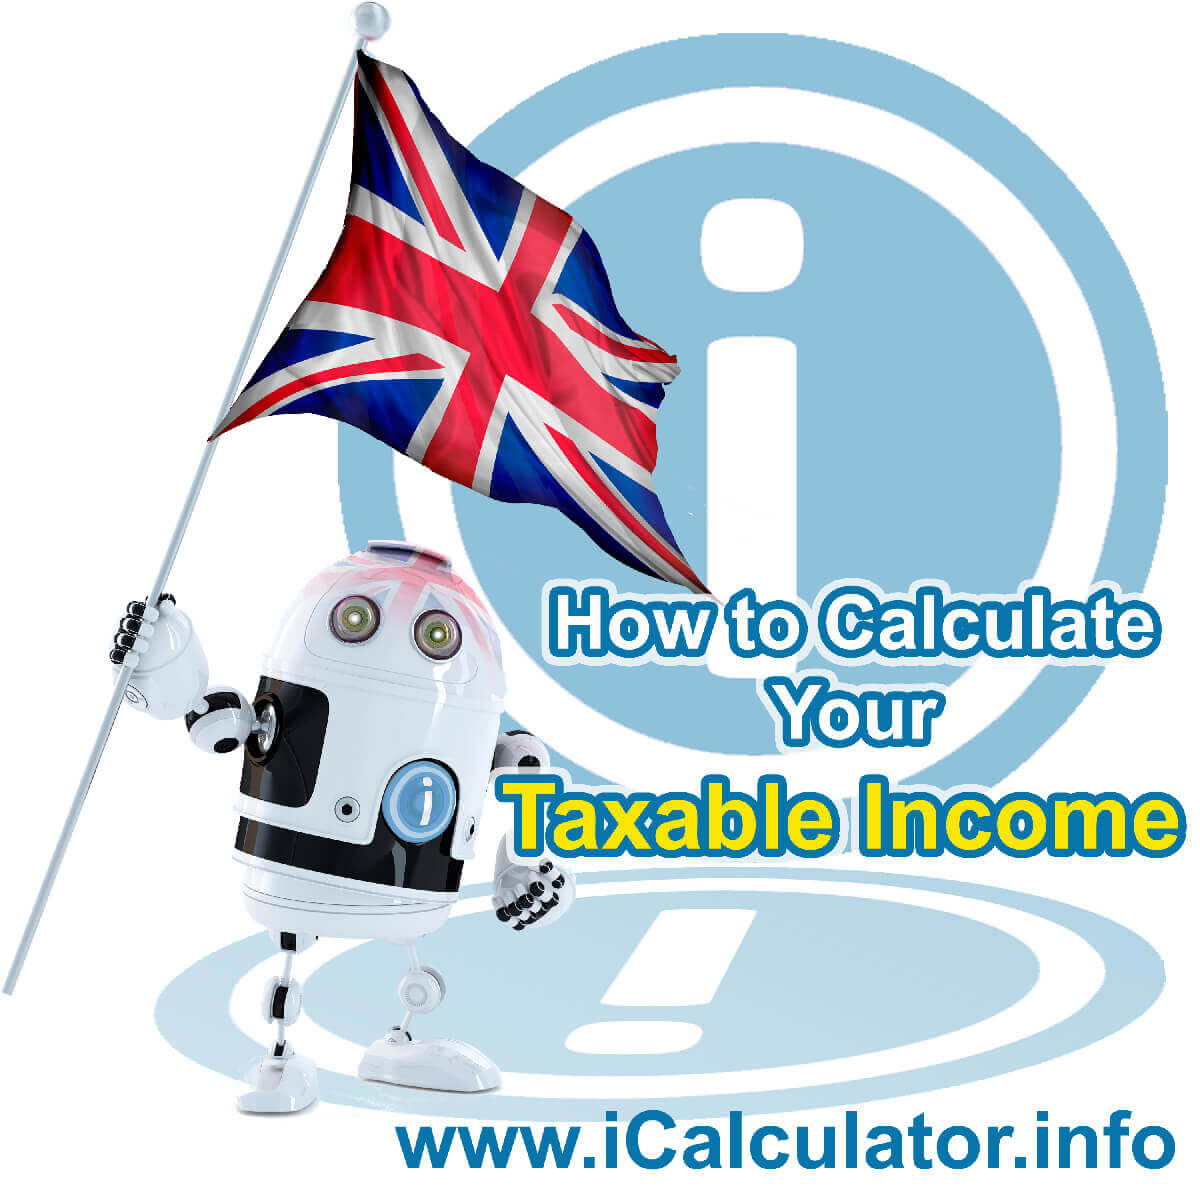 How to Calculate Taxable Income in the UK. This image shows the UK flag and information relating to the tax formula used to calculate taxable income in the UK